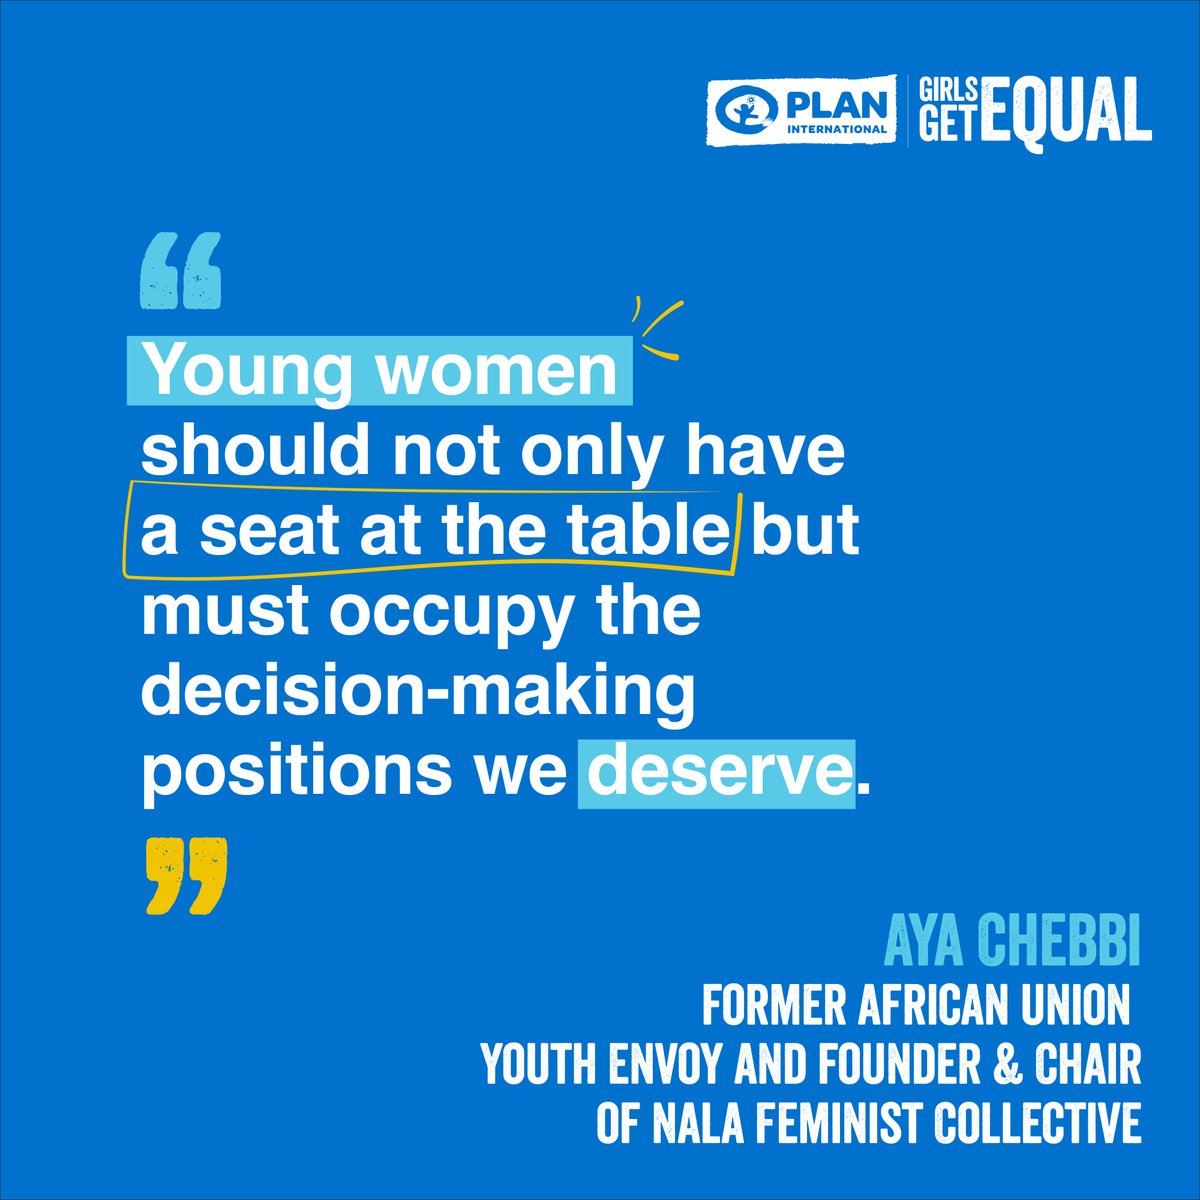 Young women like Aya Chebbi want their voices heard and they want access to formal decision-making, but they need your support. Stand with girls across the globe and send a tweet to your leader so they uphold girls’ fundamental rights to participate.  #DearLeaders #EqualPowerNow